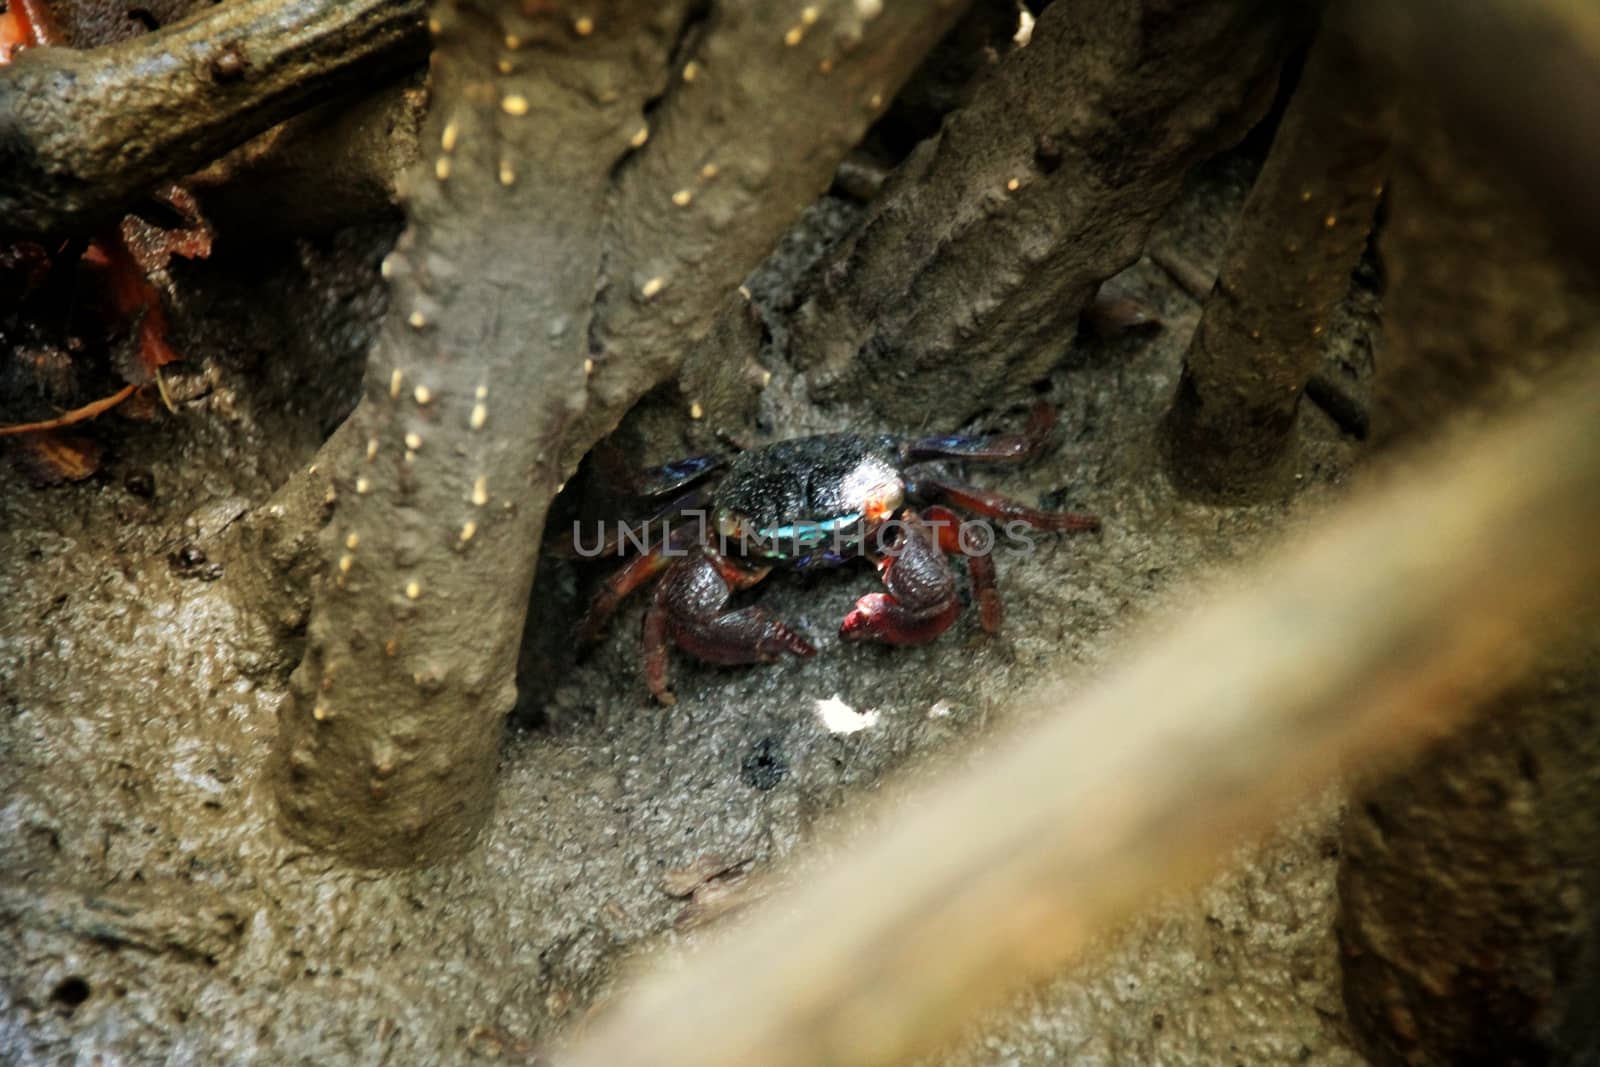 Uca tetragonon, a species of fiddler crab commonly found in mangrove areas by Sonnet15